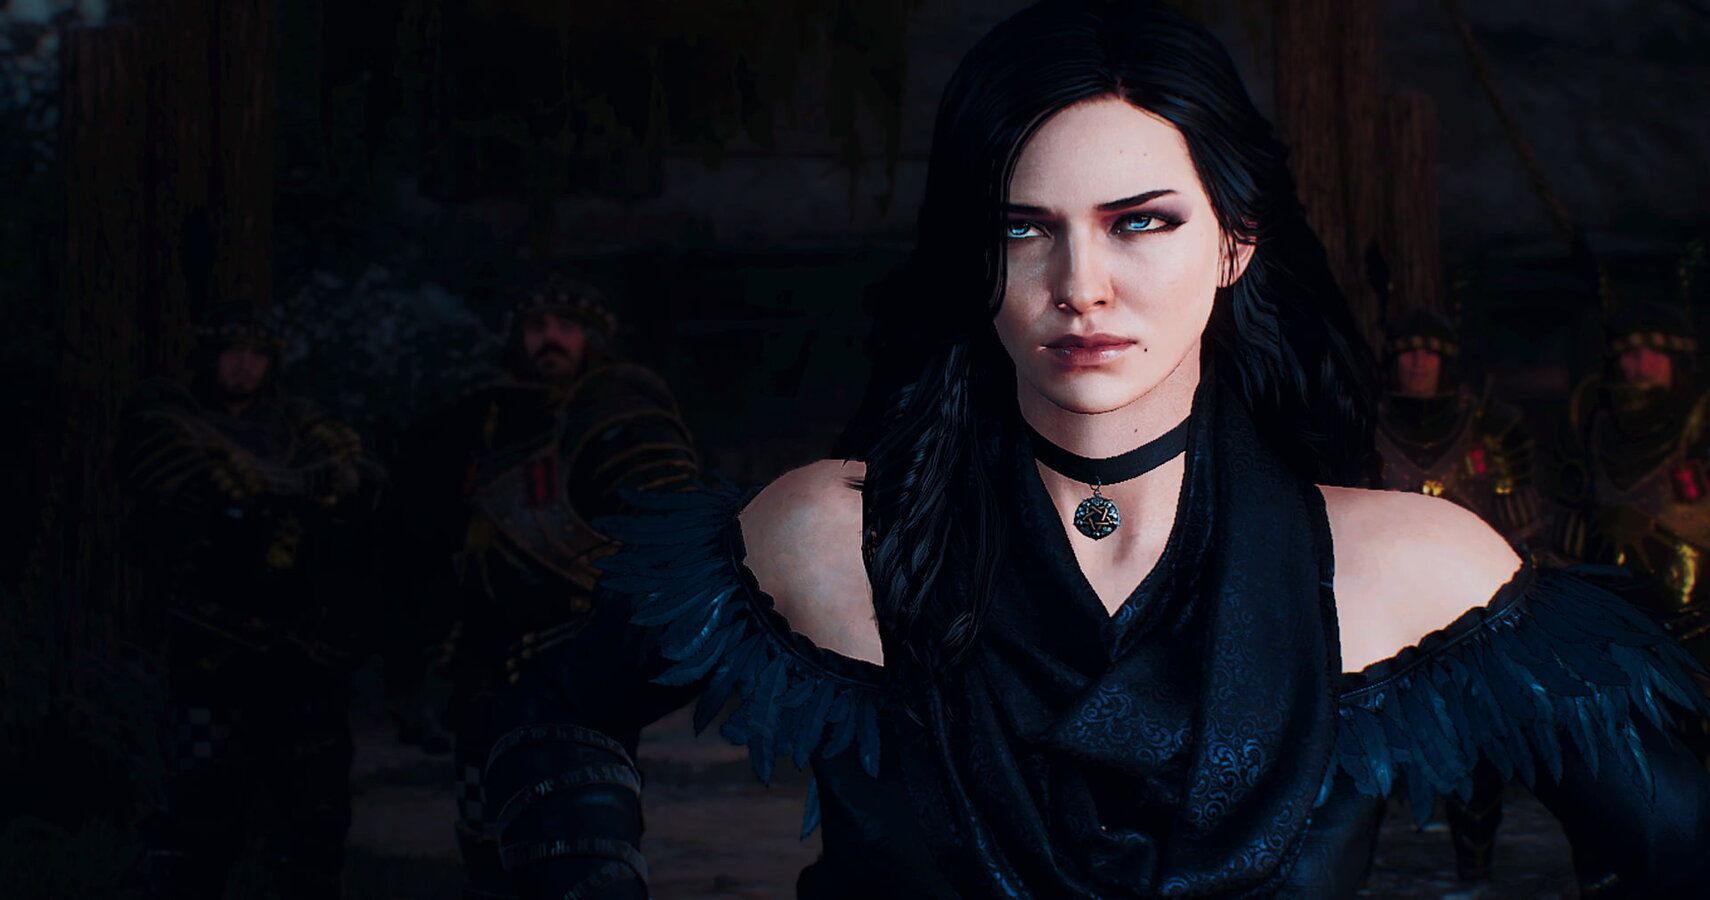 Yennefer in The Witcher 3